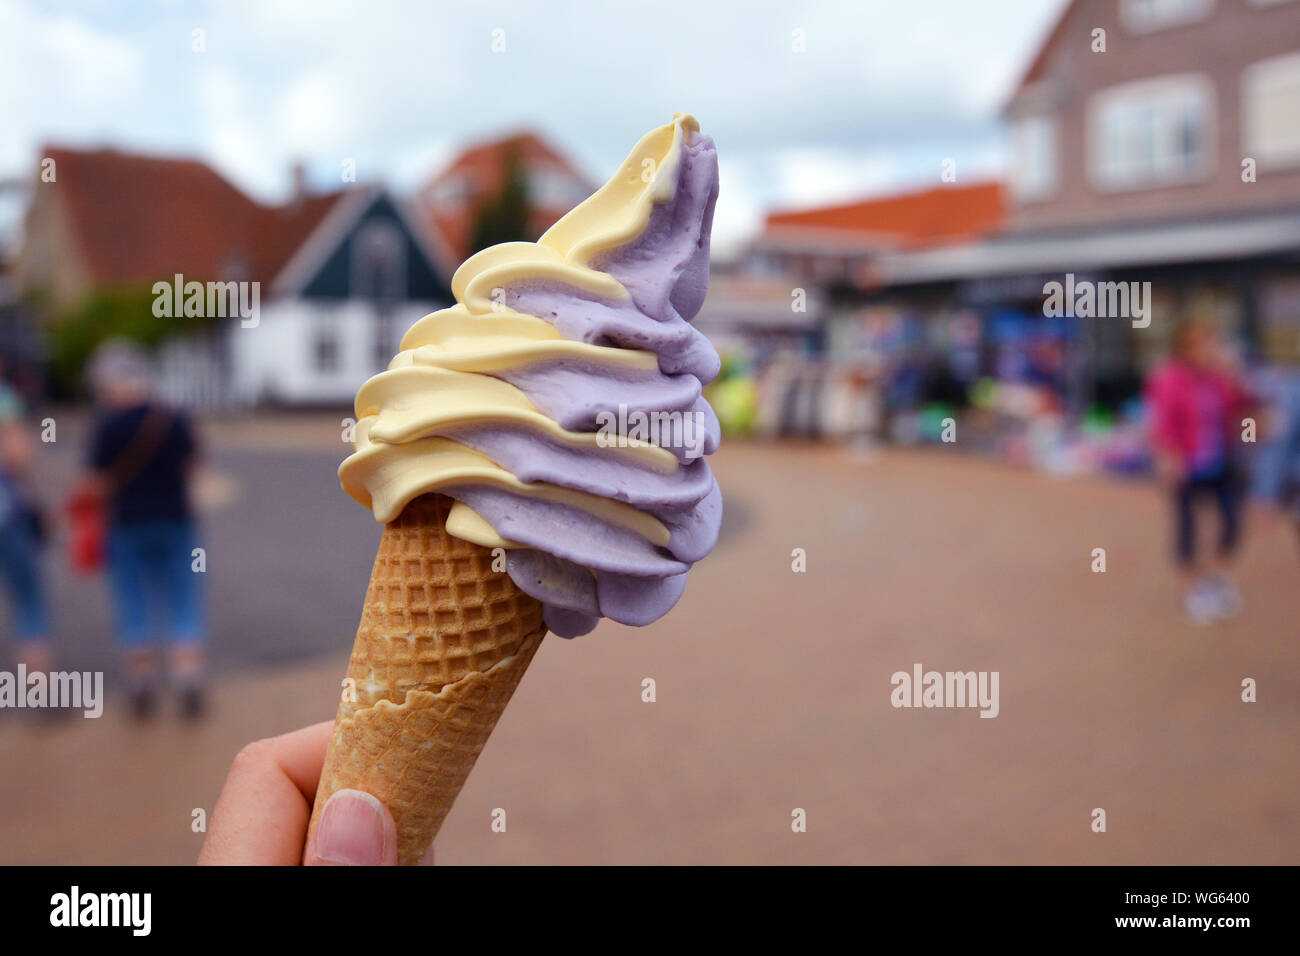 Close up of hand holding cone with mixed yellow and purple mango and berry soft serve ice cream with blurry city scene in background Stock Photo